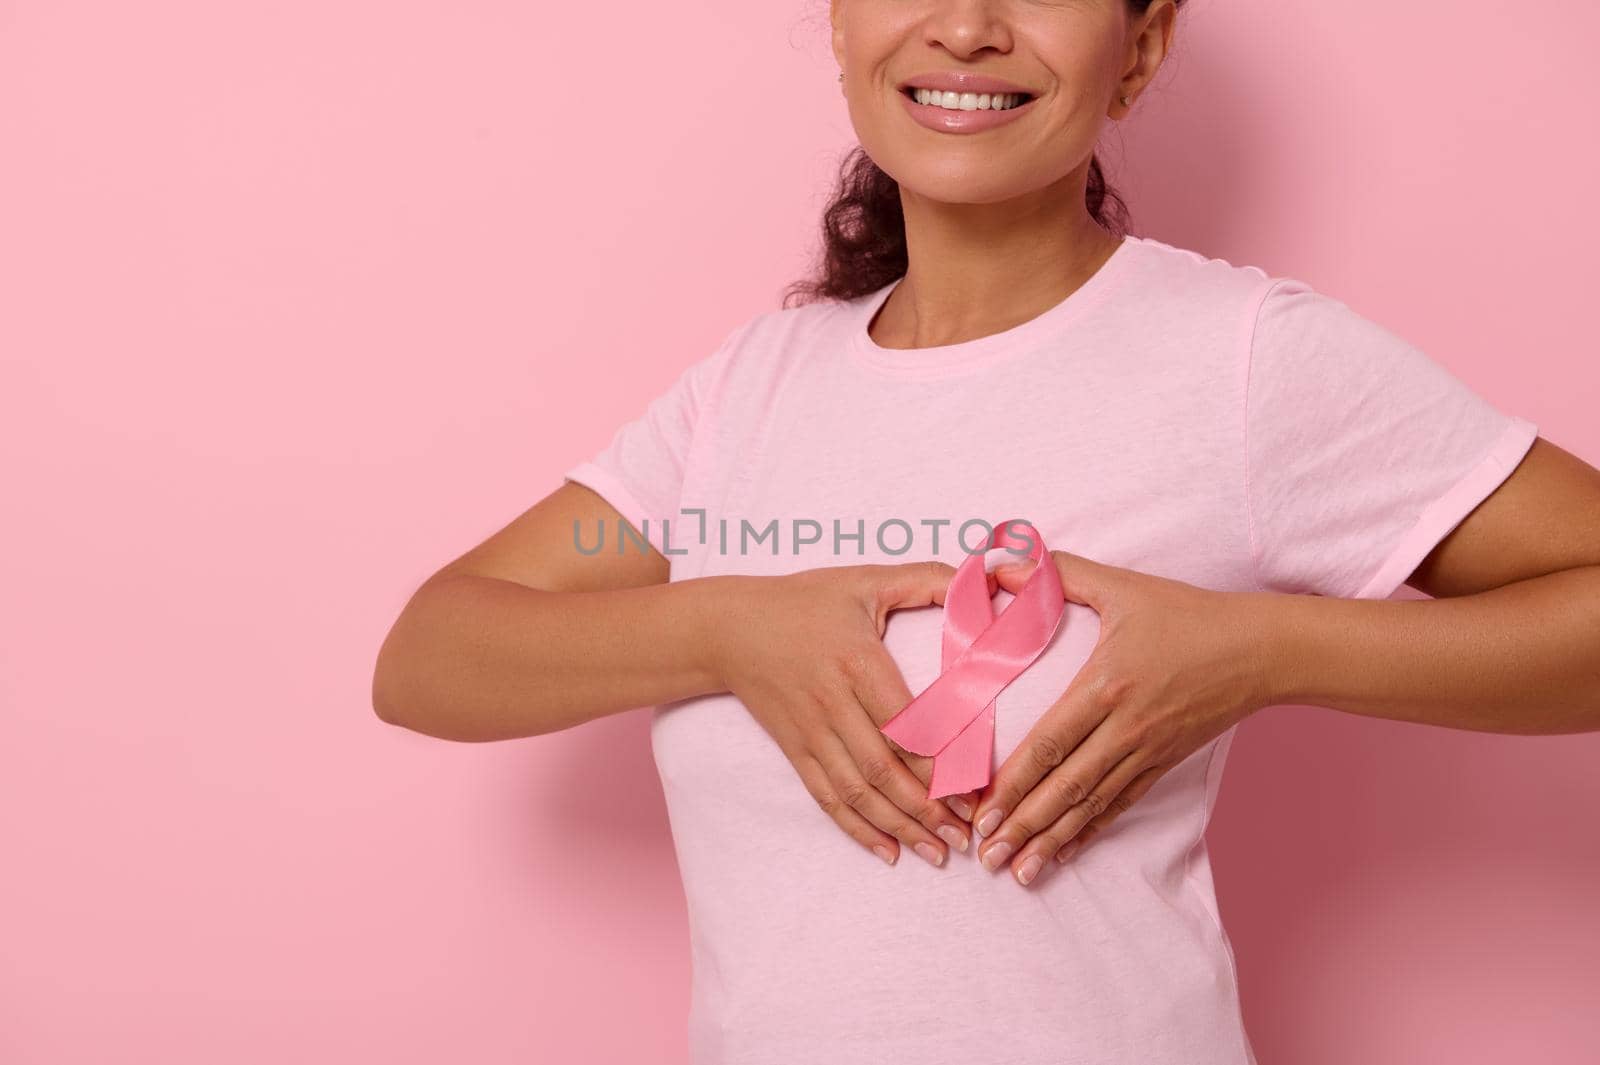 Cropped portrait on colored background of smiling woman in pink t-shirt, putting hands on chest in shape of heart with a pink satin ribbon in the center. World Cancer Awareness Day, fighting cancer